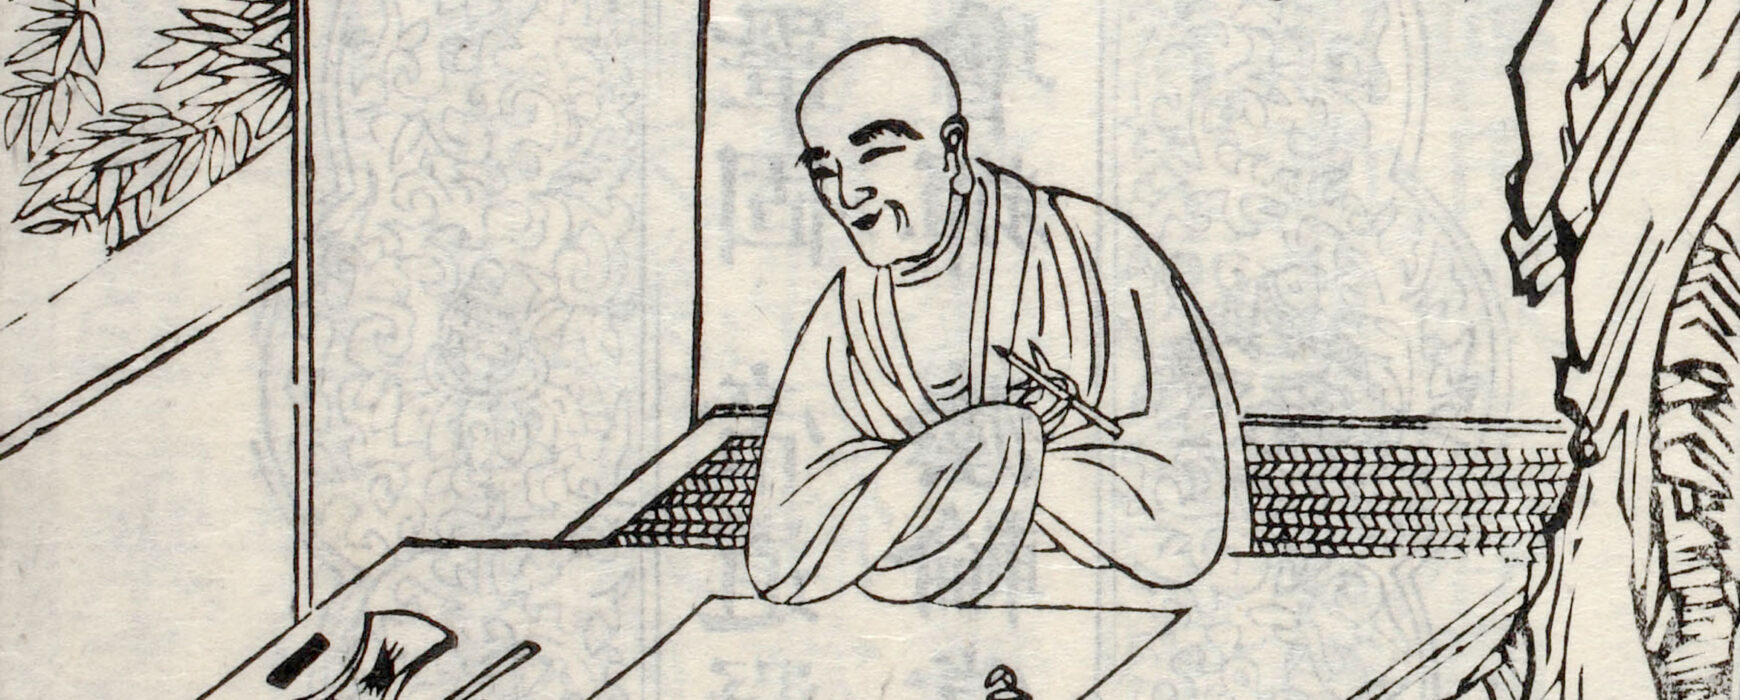 A Forest of Knowledge about the Texts and Images regarding Buddhist Saints, Sages, Translators, and Encyclopedists